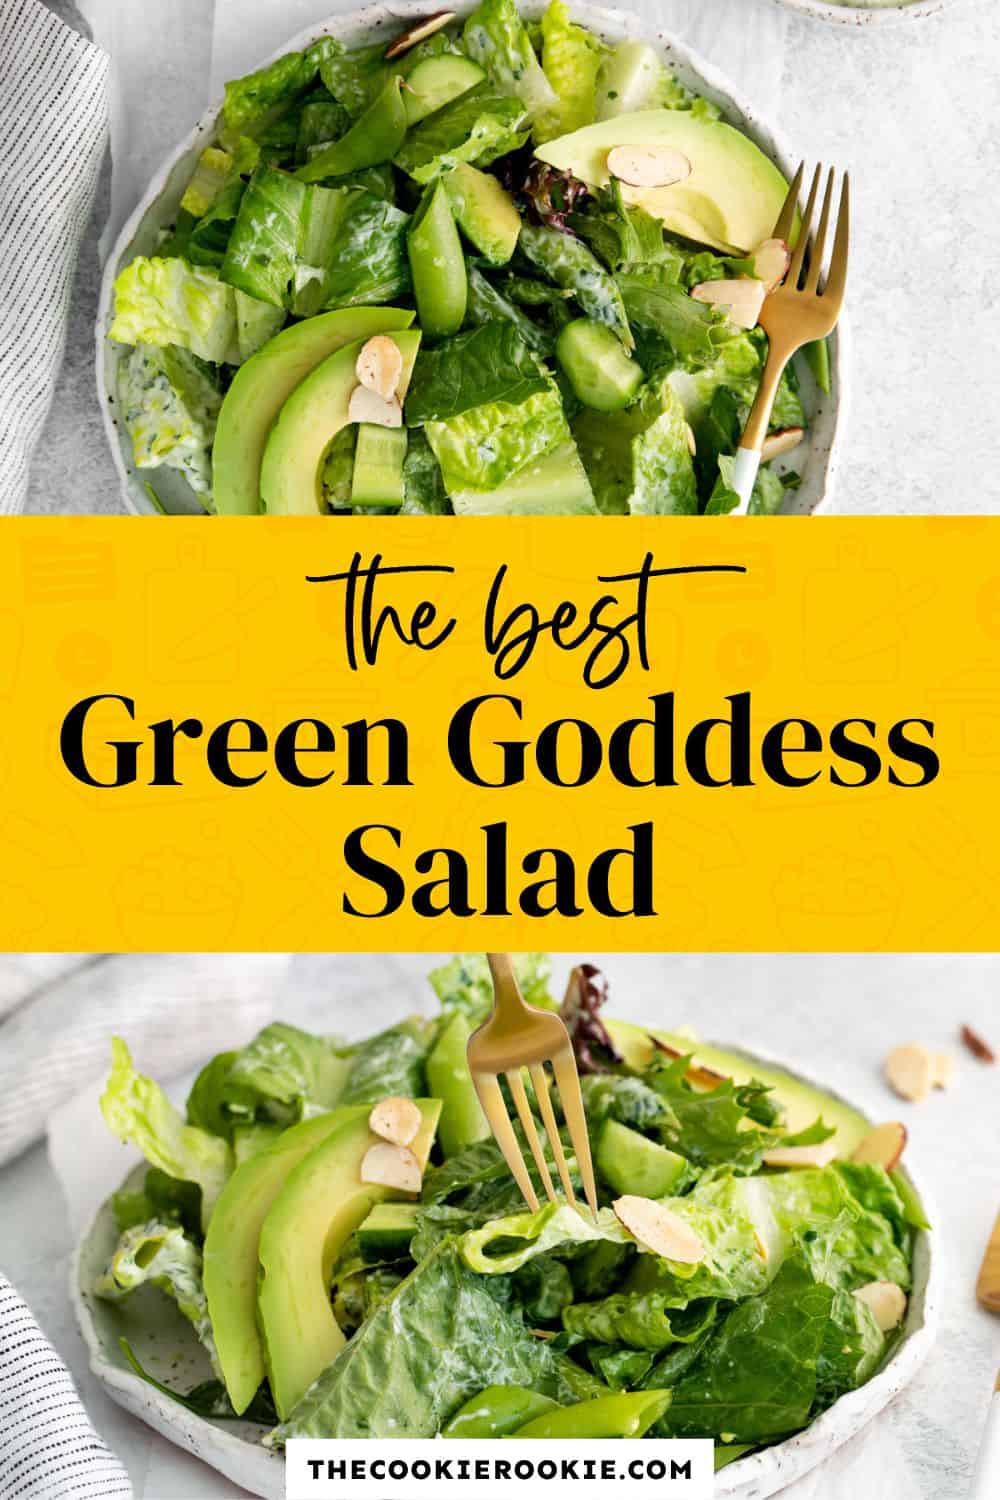 Green Goddess Salad Recipe - The Cookie Rookie®